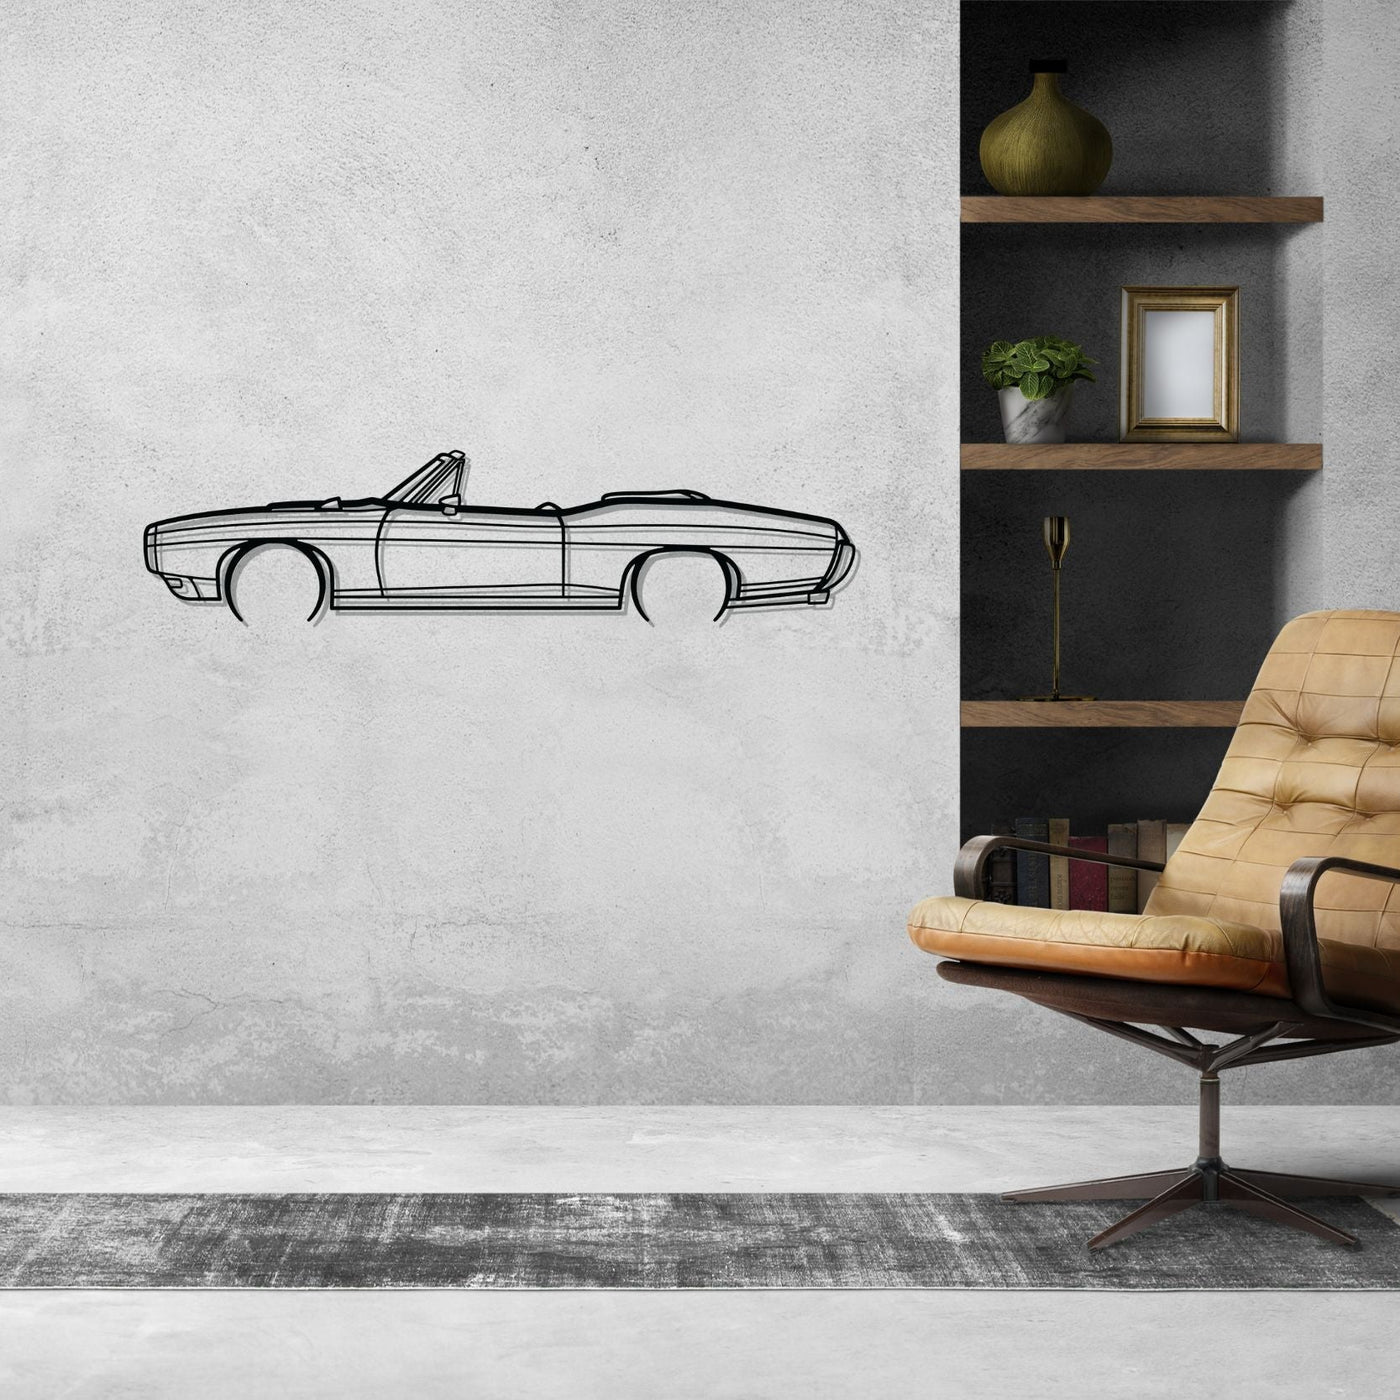 GTO Convertible 1969 Detailed Silhouette Metal Wall Art